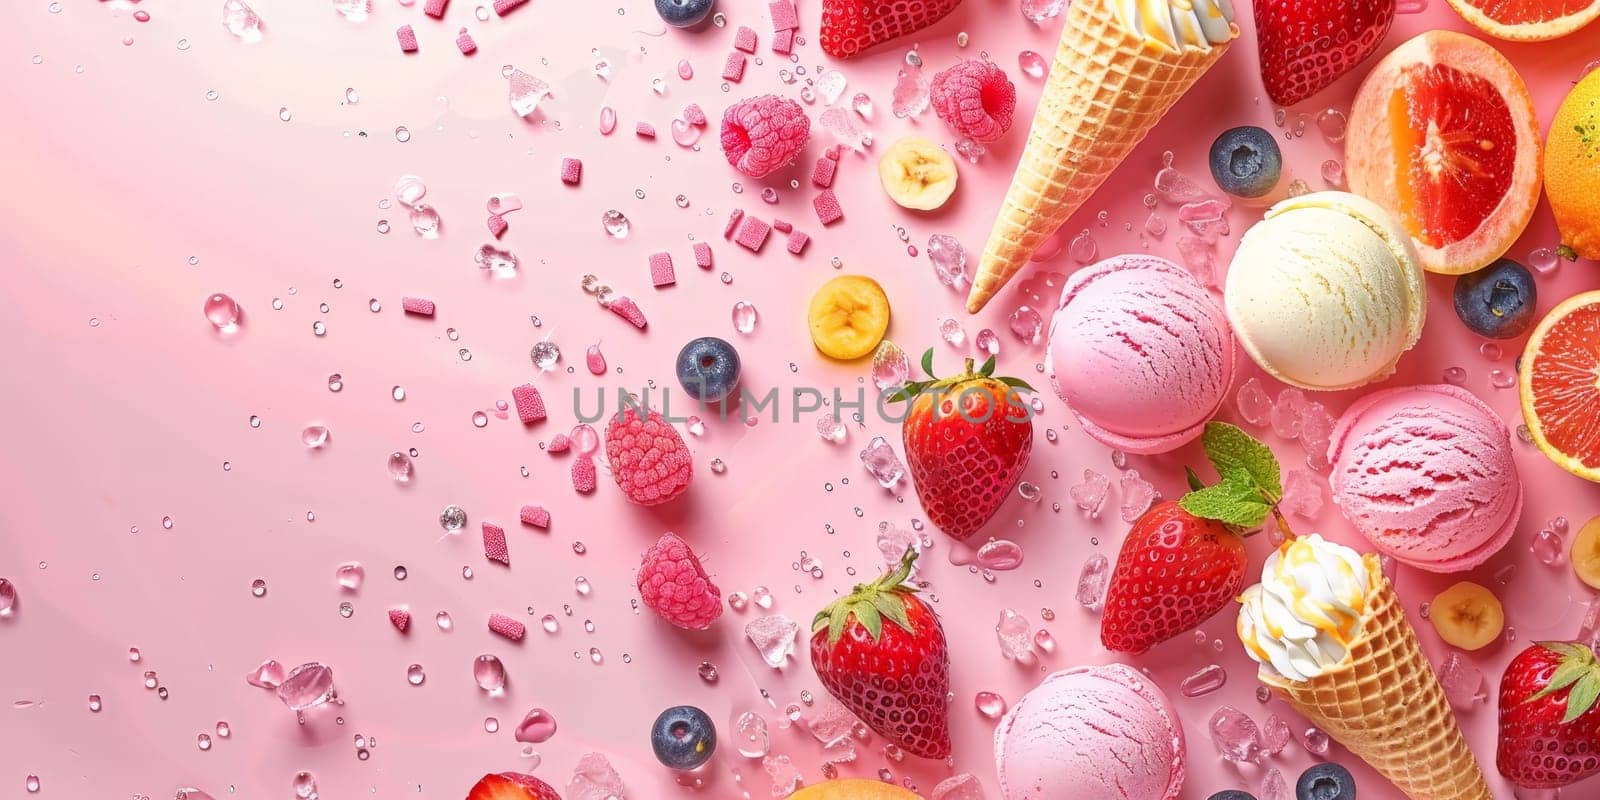 A colorful display of ice cream, fruit, and ice cream cones on a pink background by nateemee